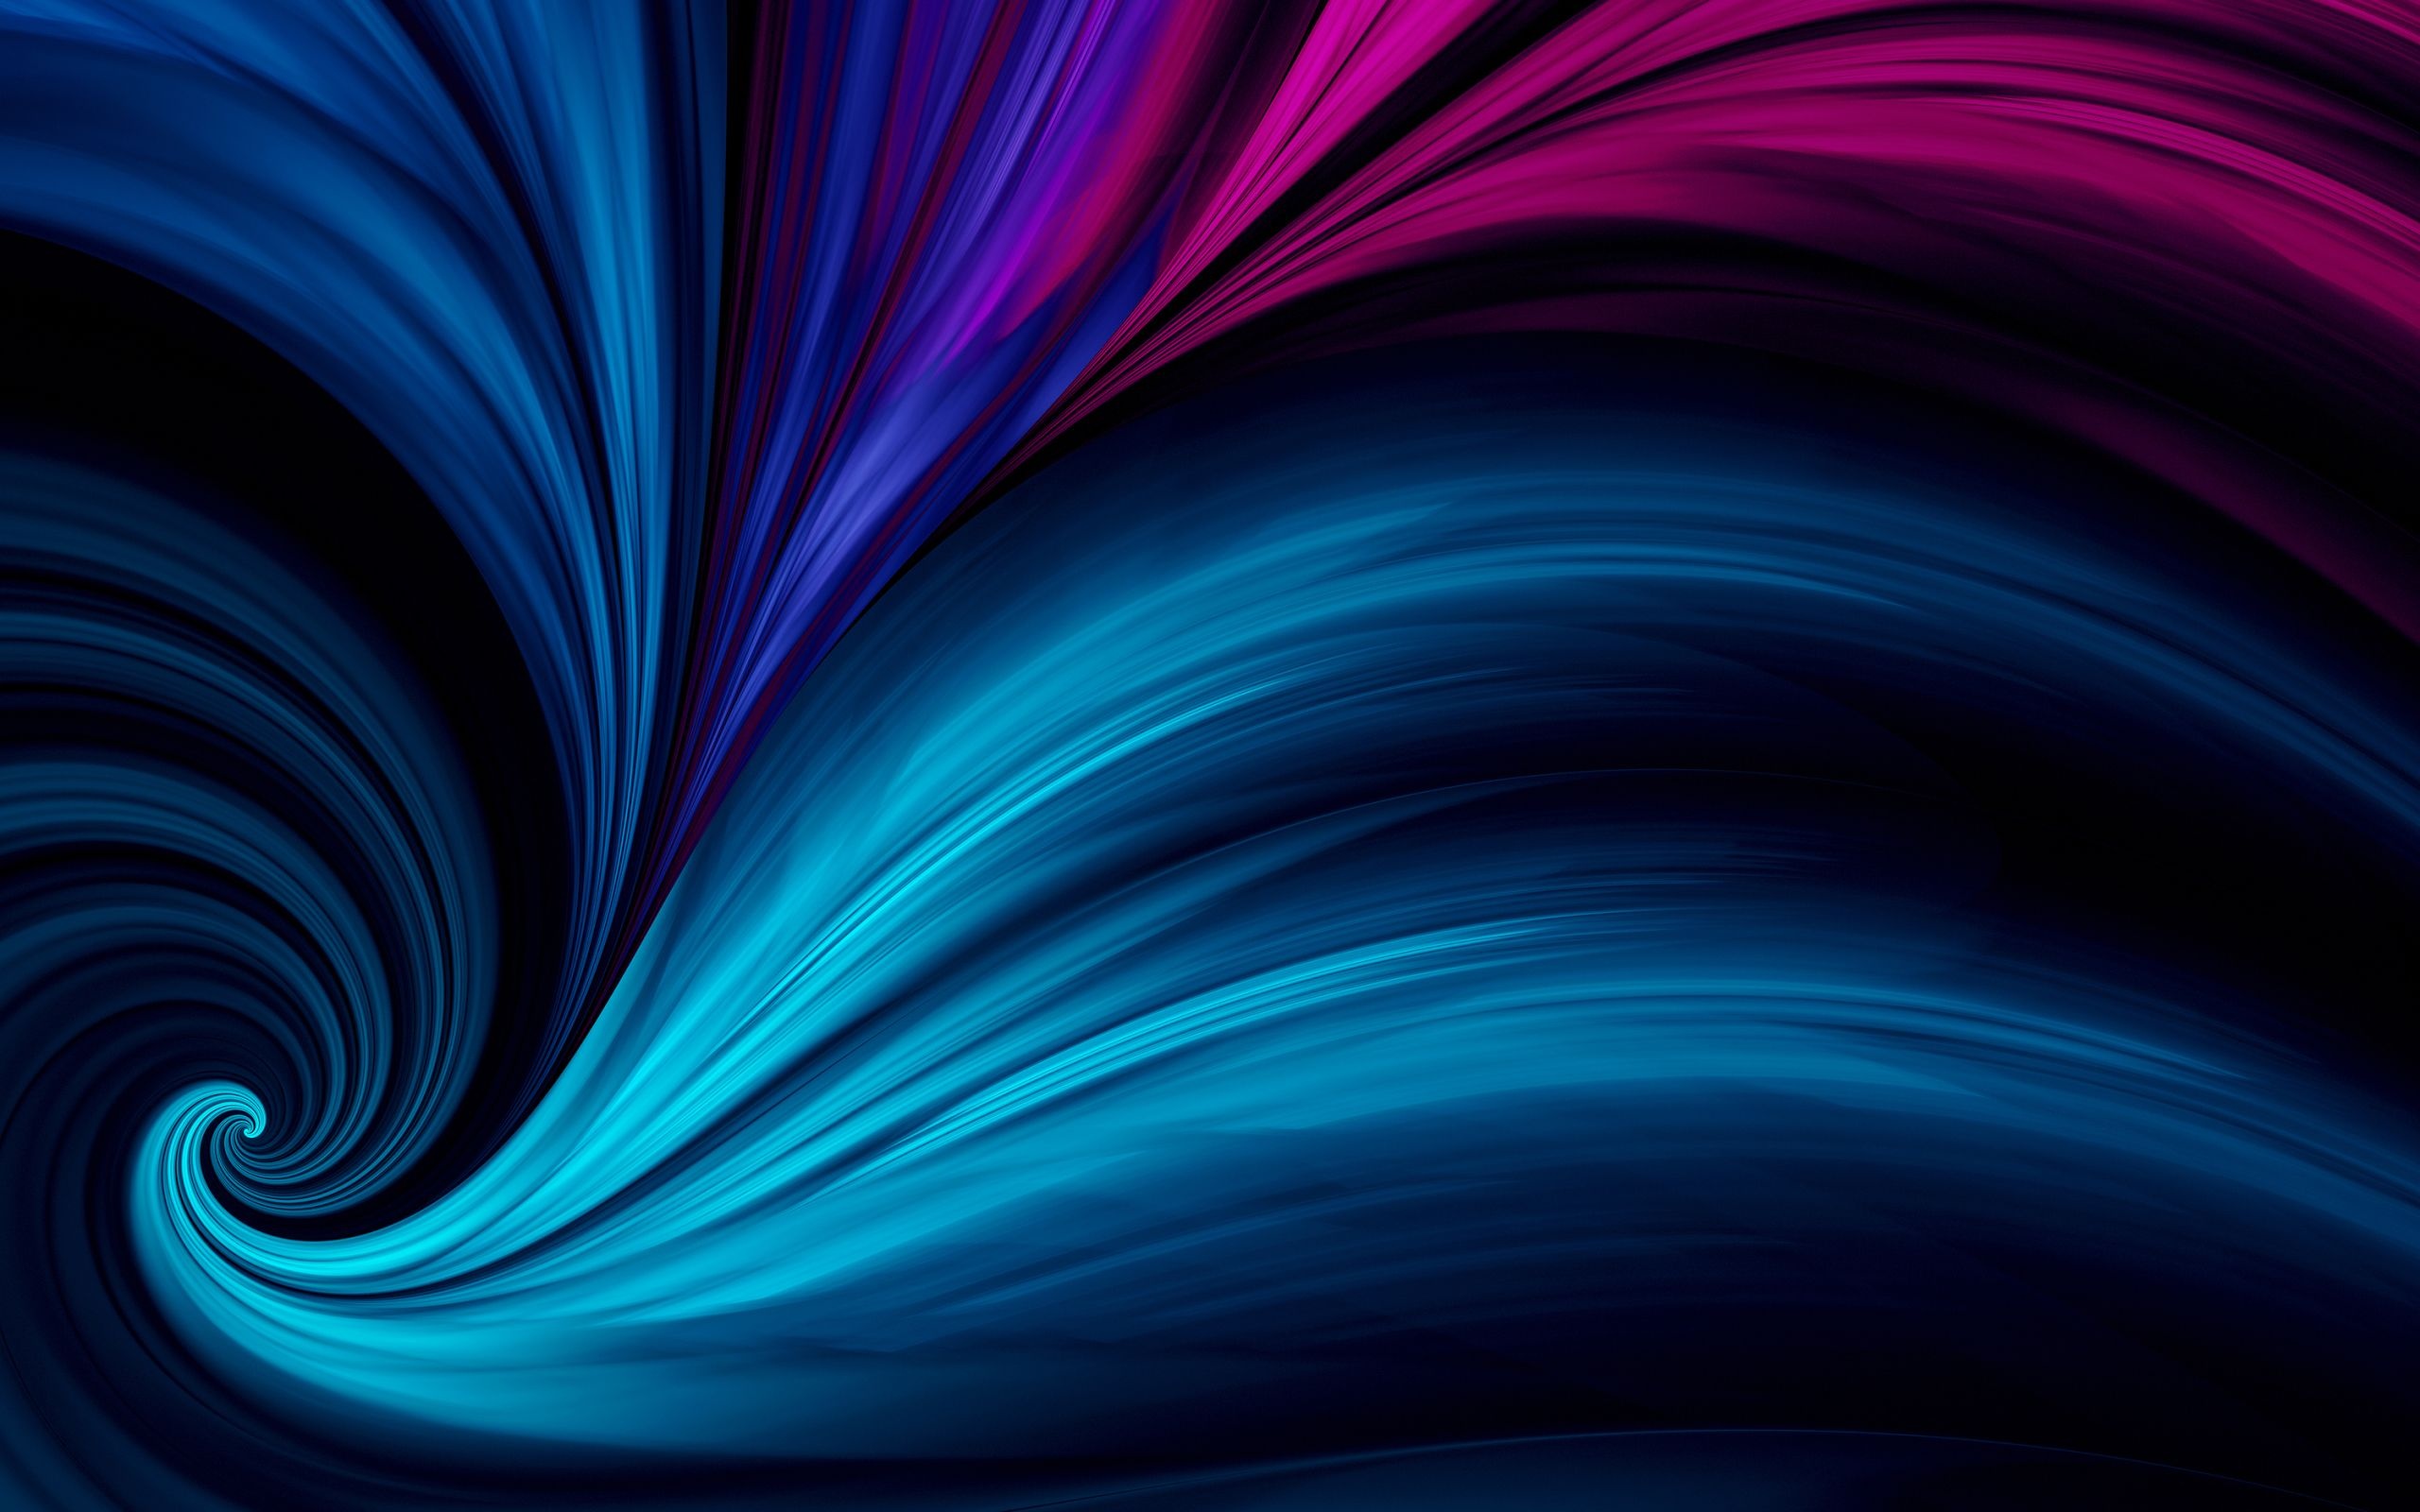 Abstract swirl, Creative patterns, Artistic expression, Visual beauty, 2560x1600 HD Desktop